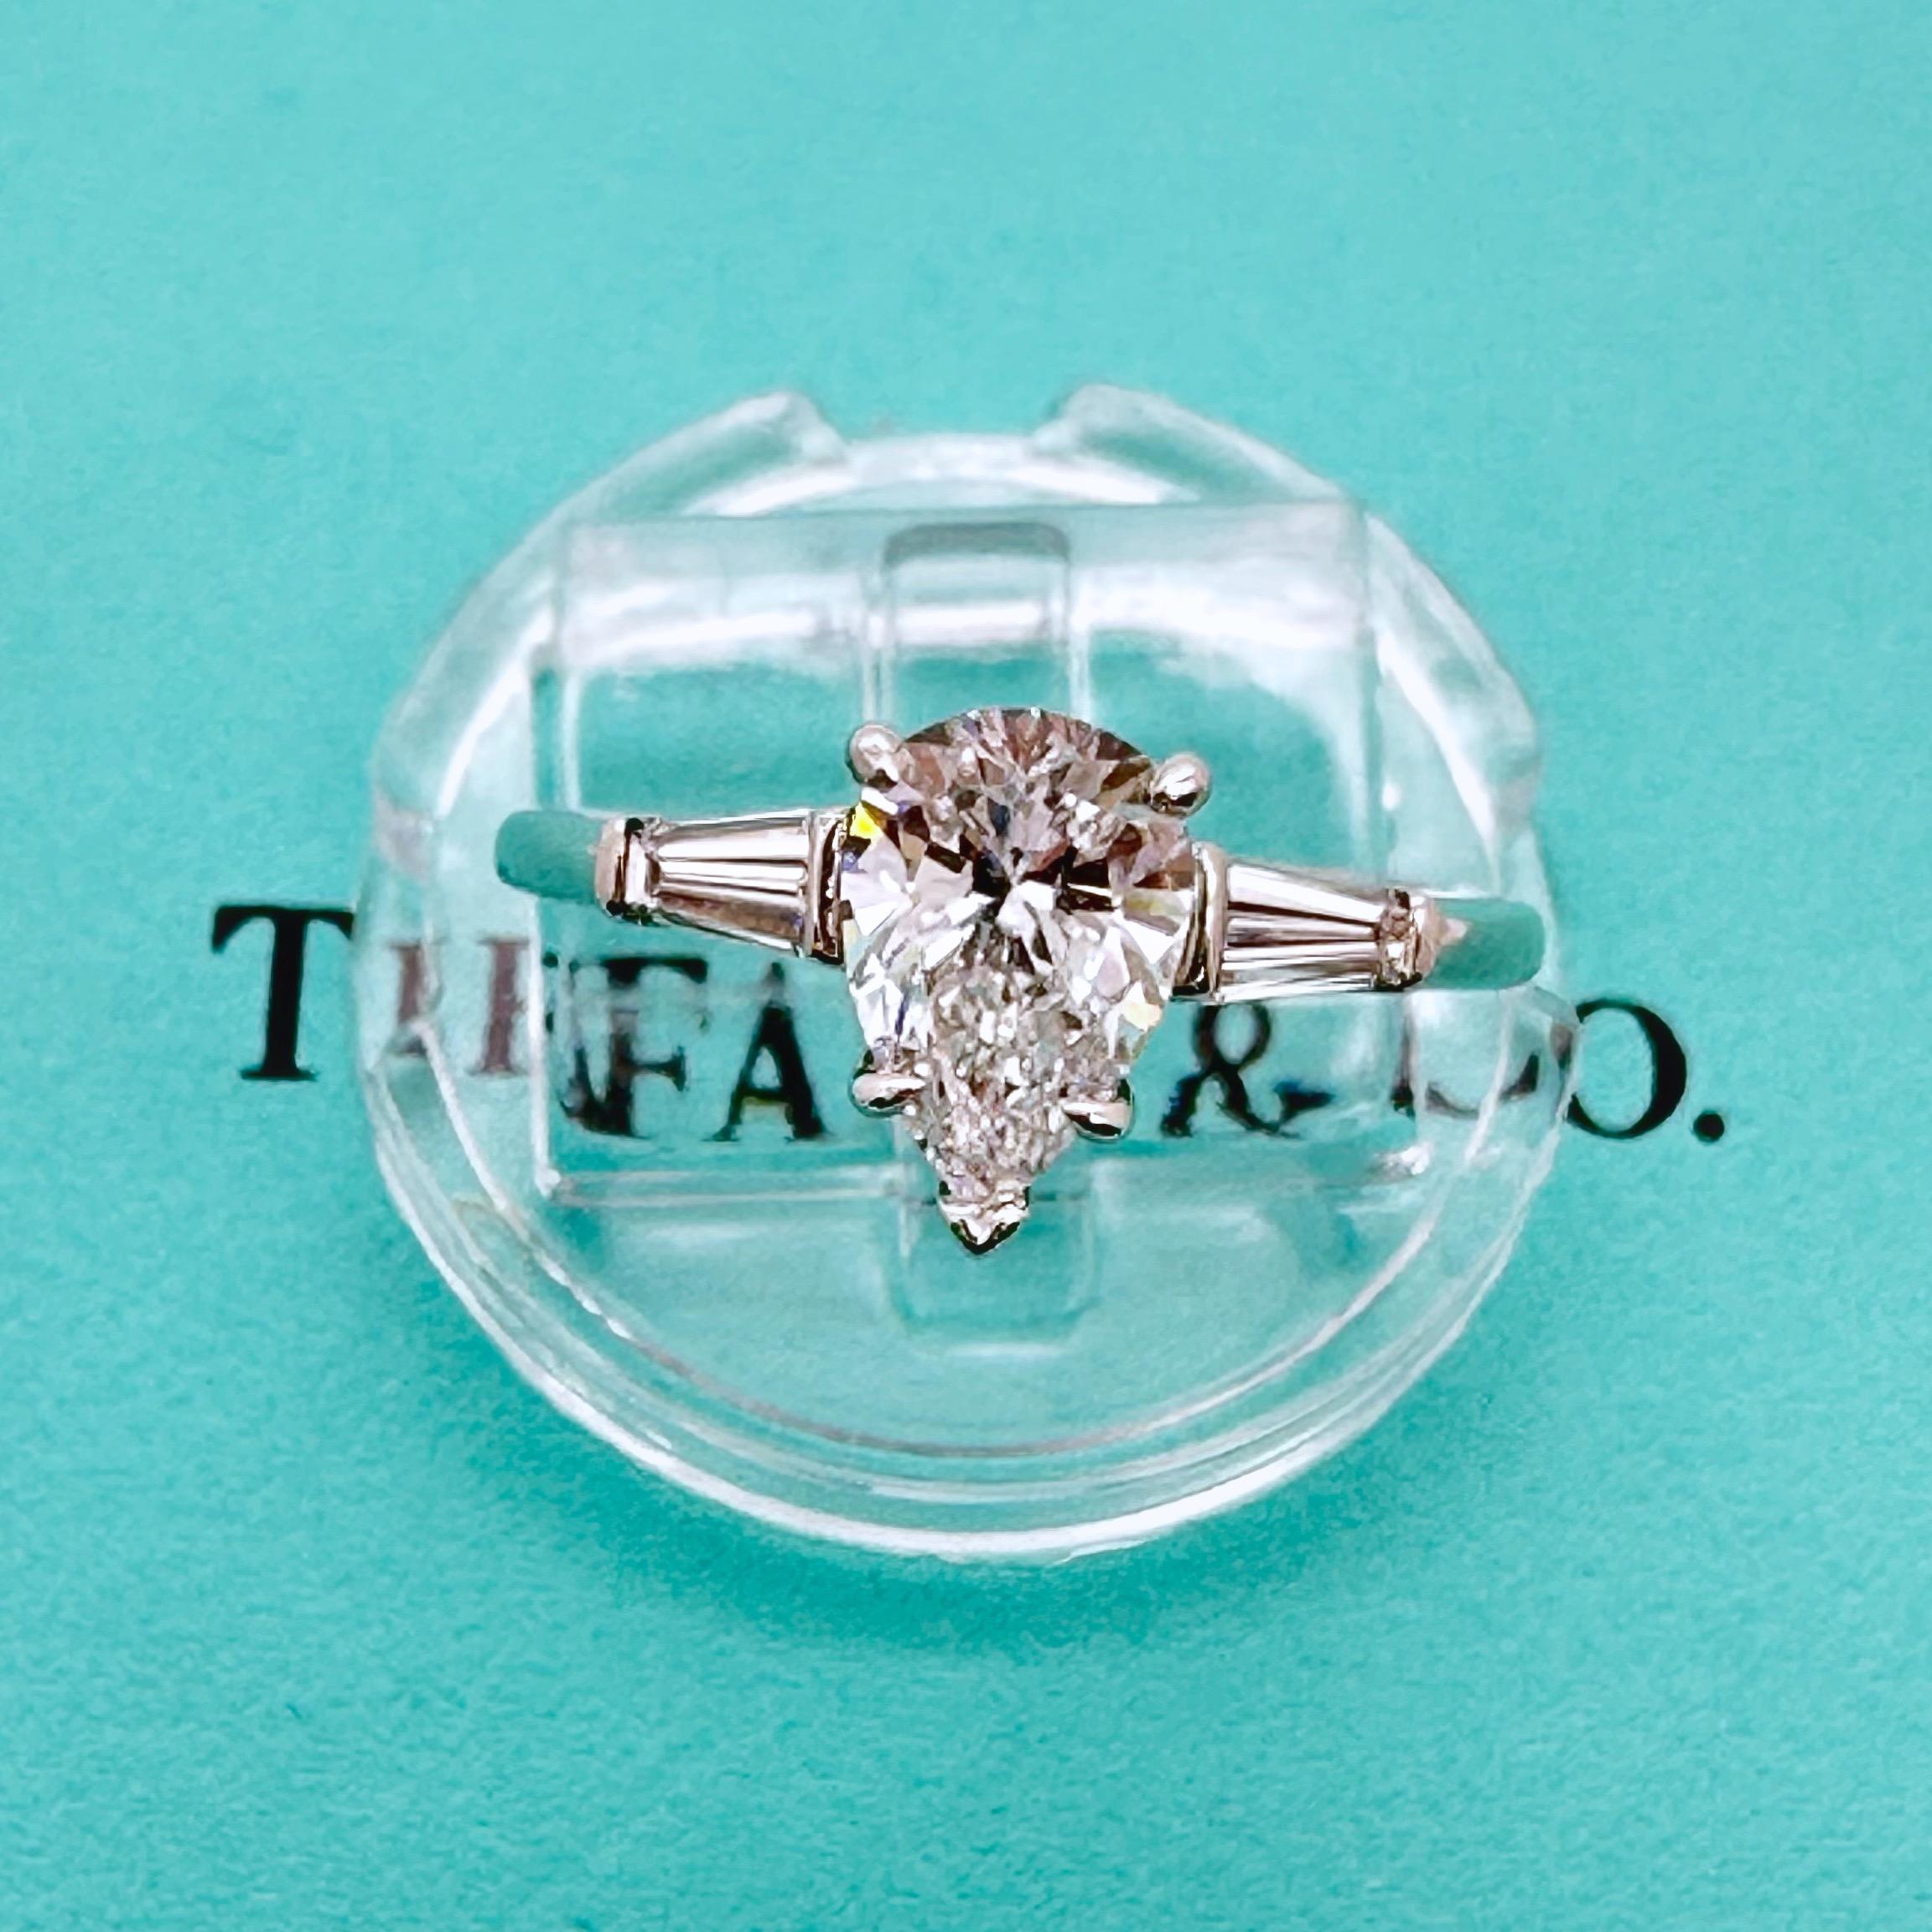 Tiffany & Co. Pear Diamond 1.07 D VS2 with Baguette Side Stones Engagement Ring In Excellent Condition For Sale In San Diego, CA